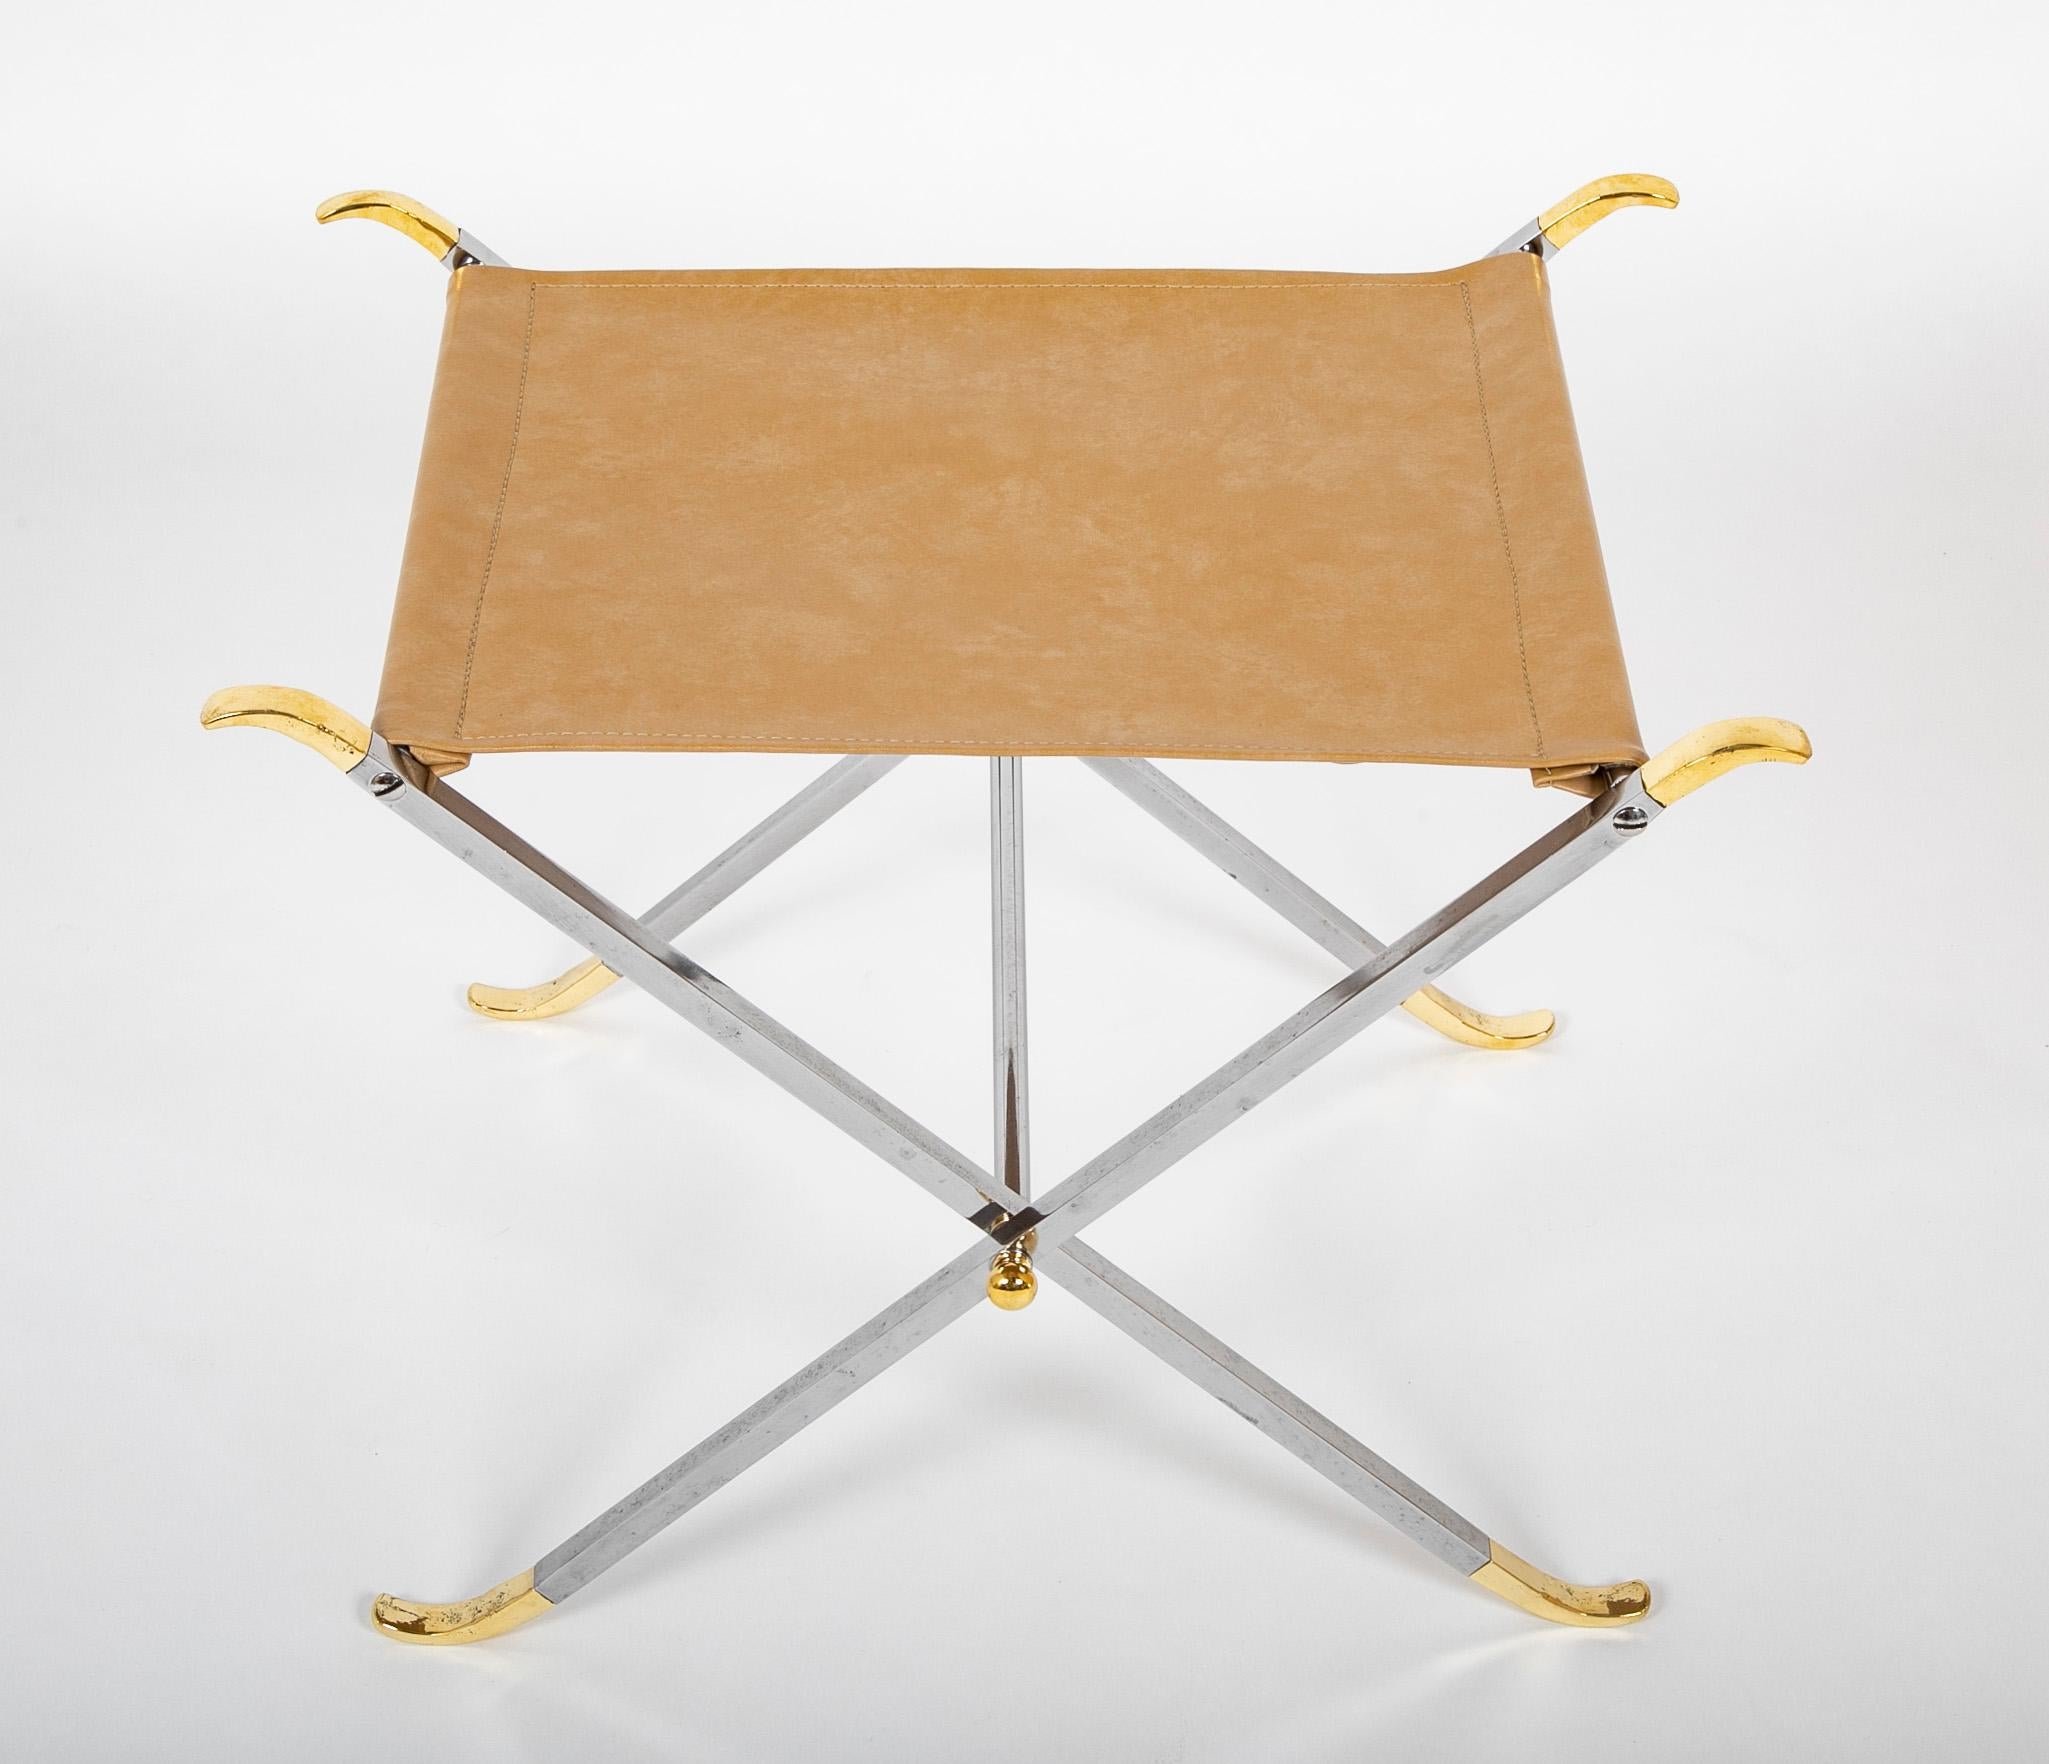 Quite elegant pair of polished steel and brass X-from stools with taupe leather seats. A very successful interpretation of the neoclassical style with clean and modern lines. Quintessential mid 20th century design. 
The stools fold for easy